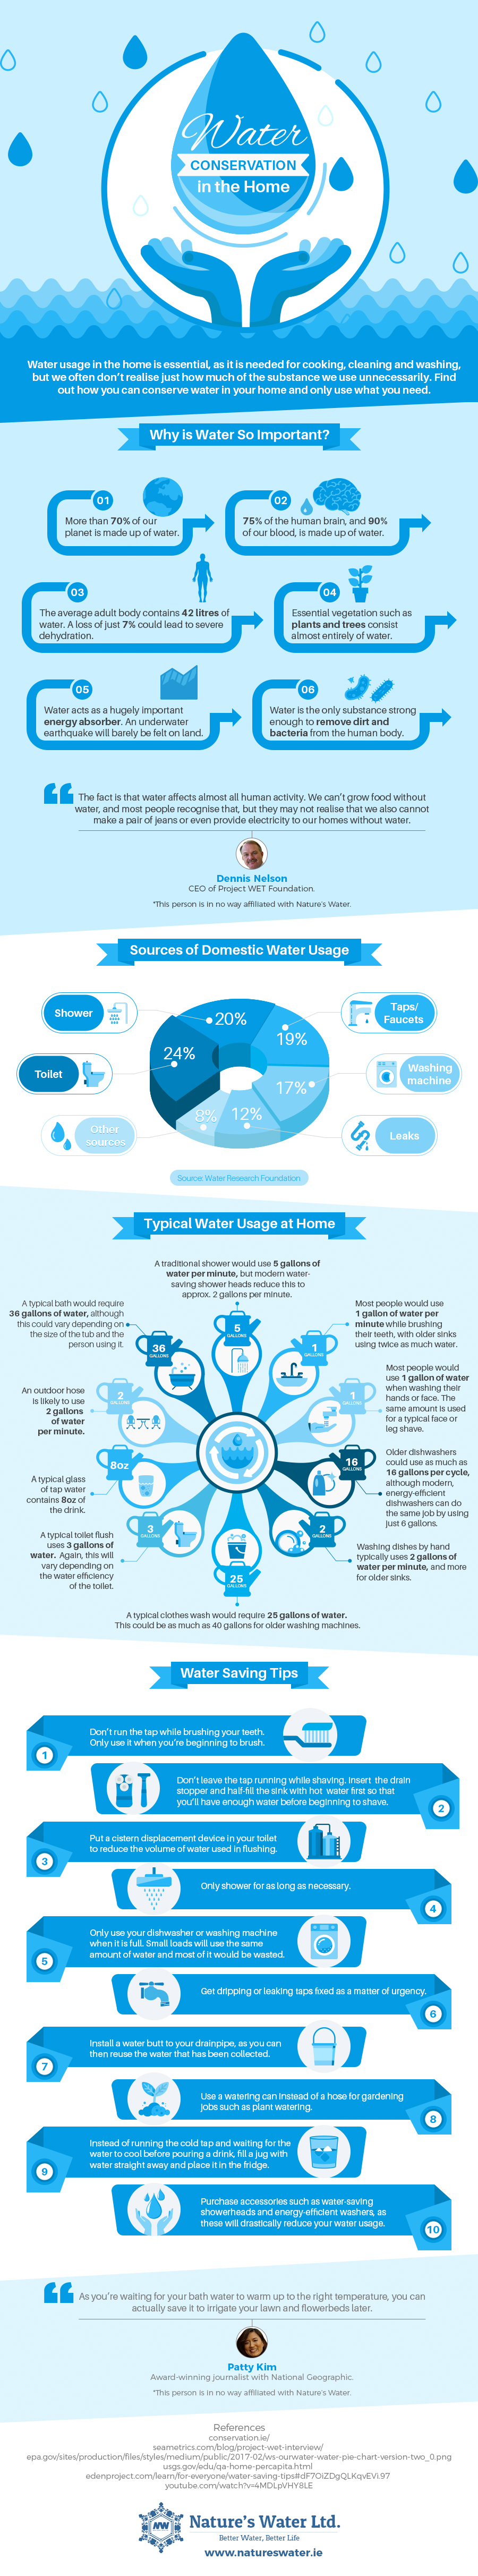 Infographic: Water conservation in the home. Courtesy of Nature's Water Ltd.